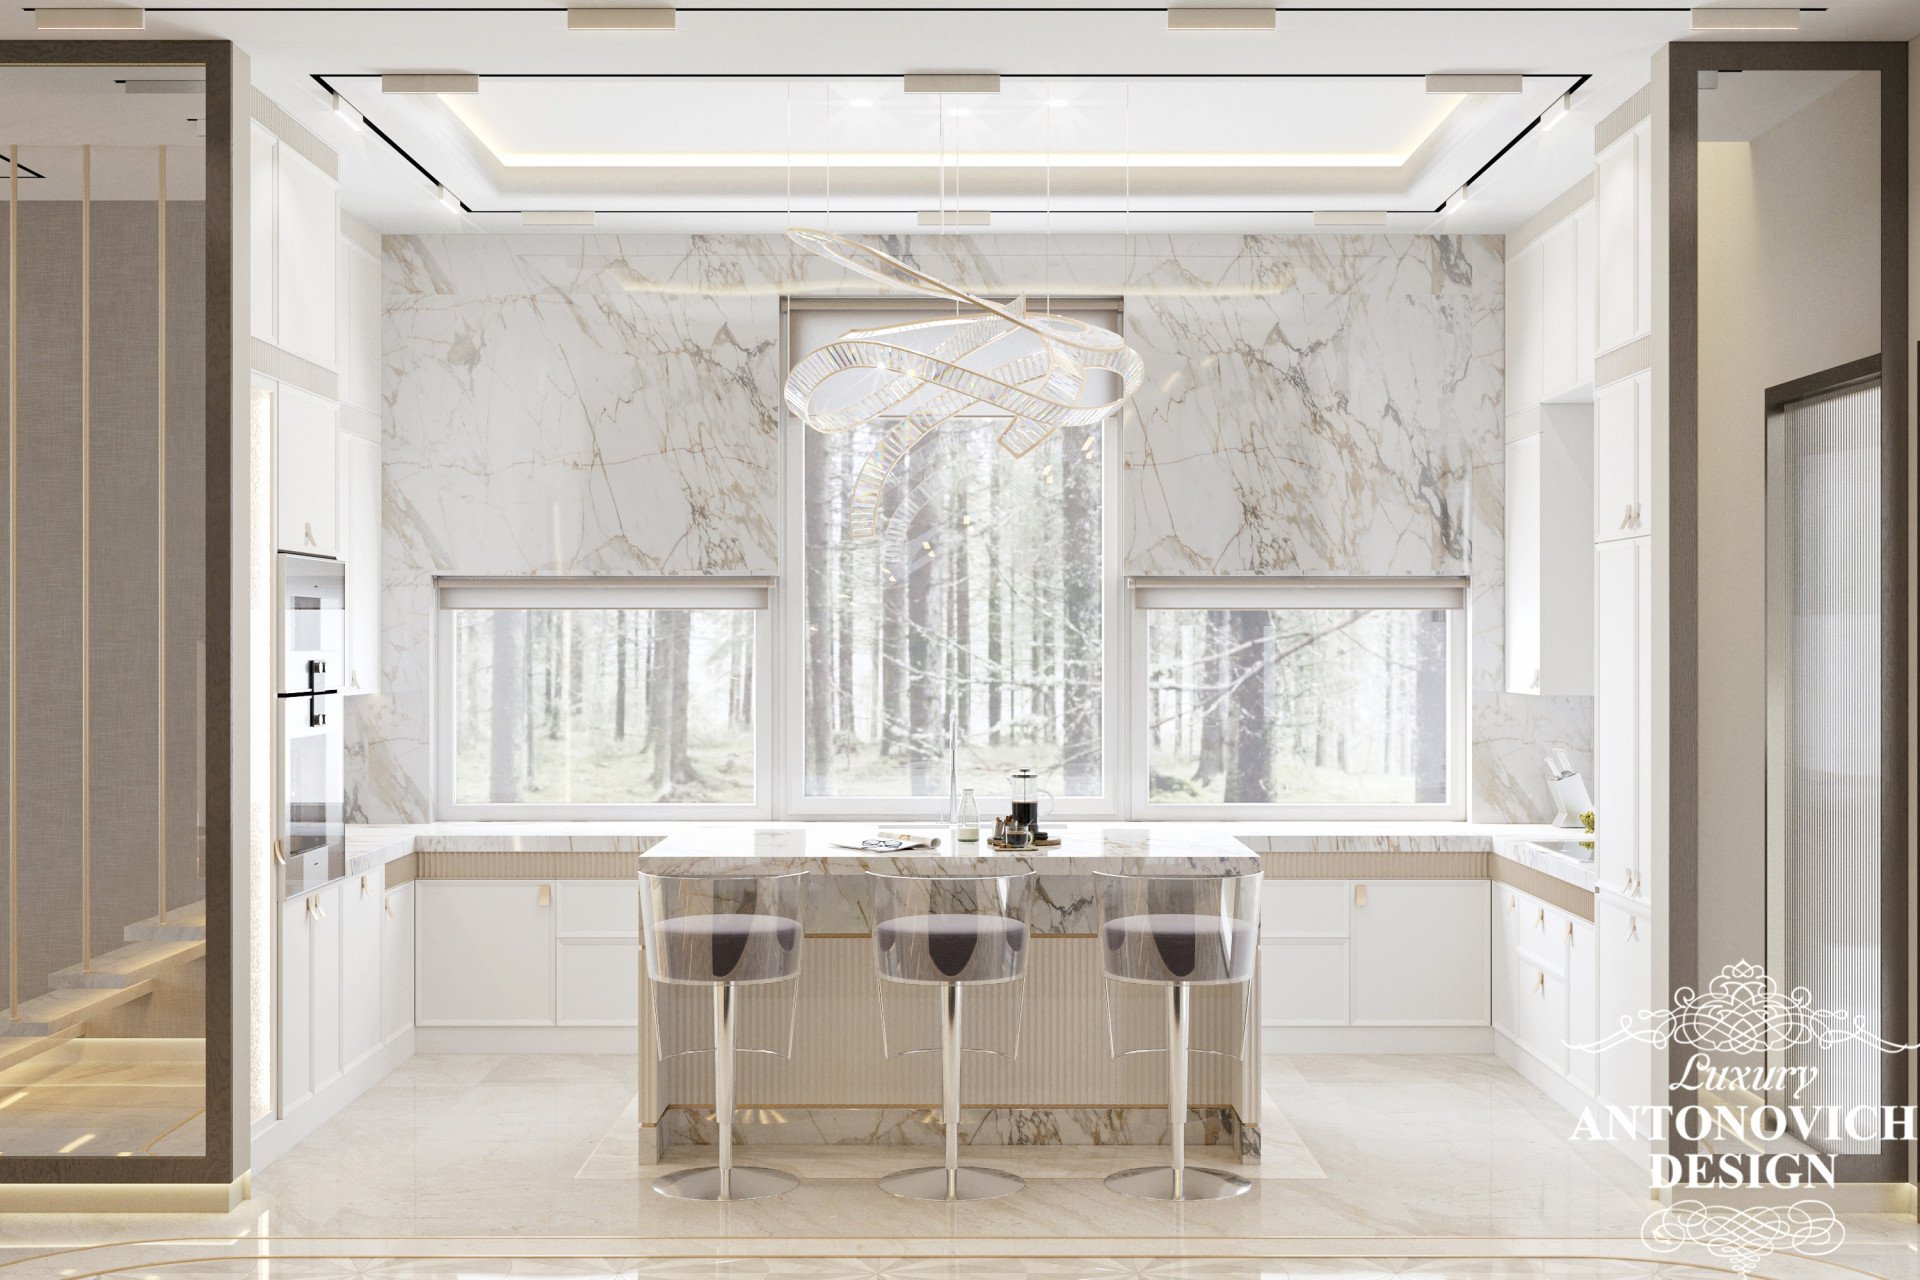 Modern kitchen: style and laconicism